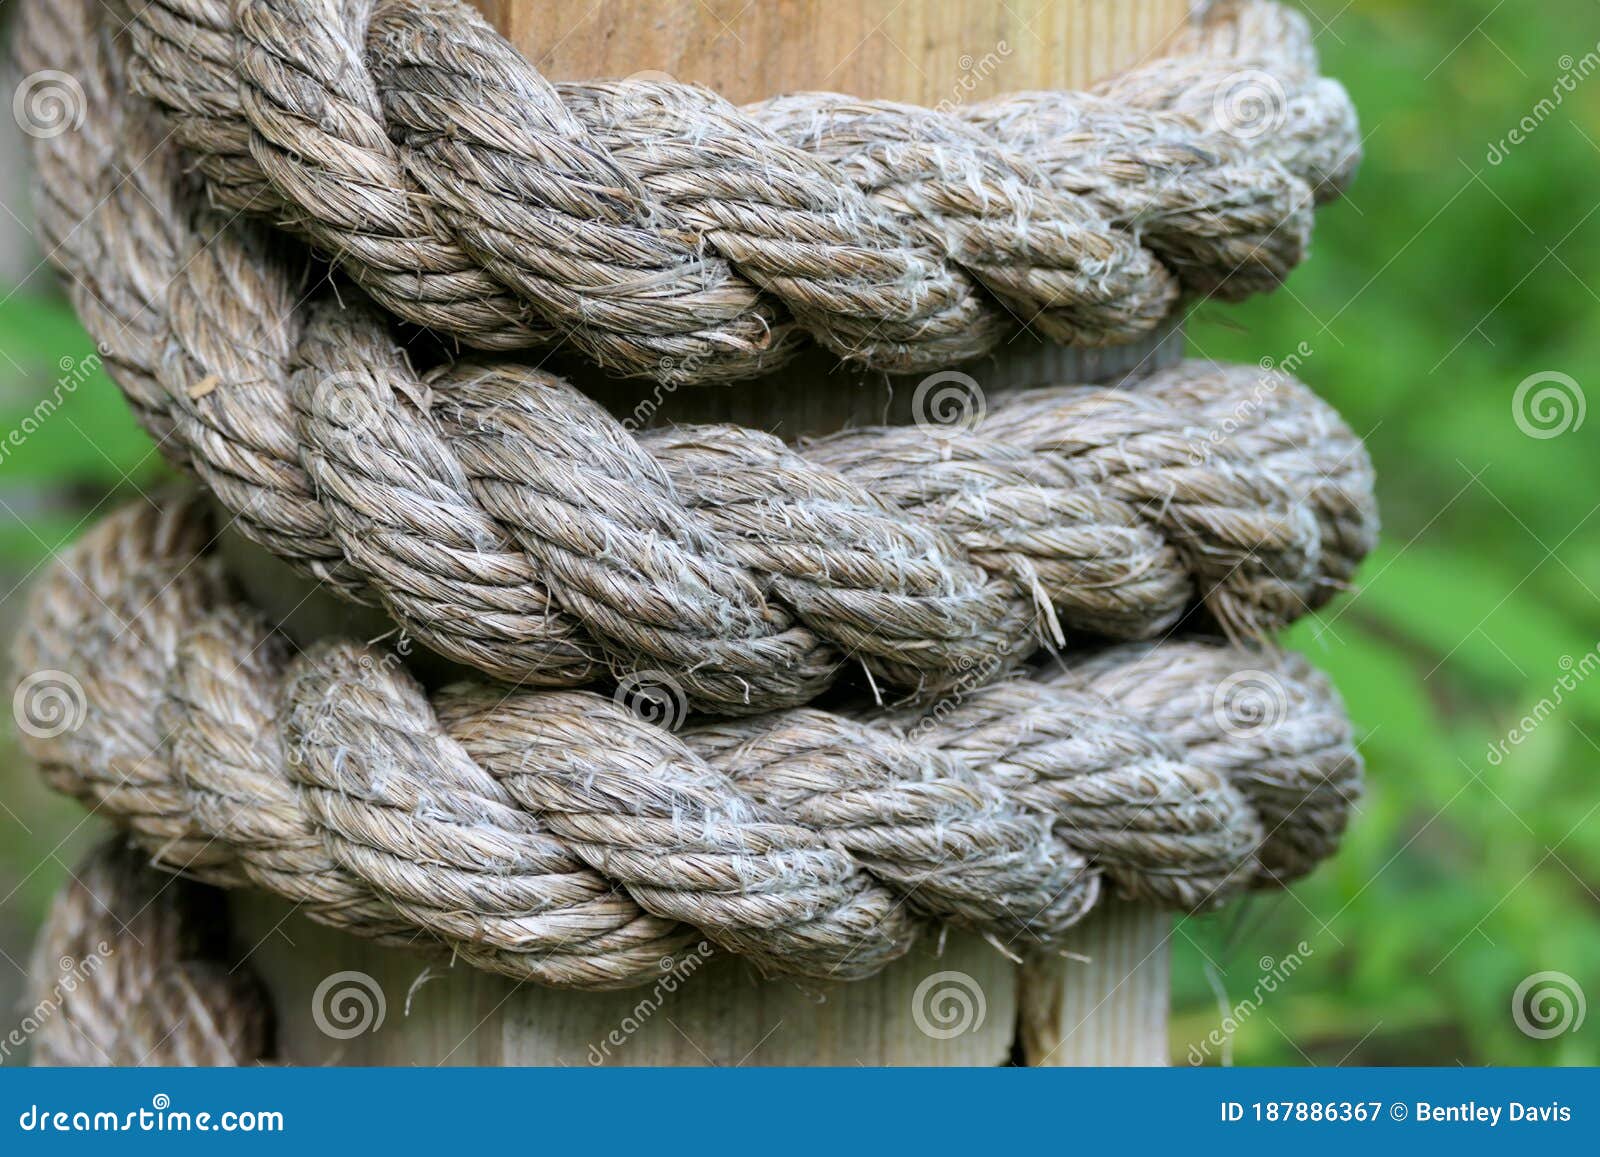 Thick Twine Rope Wrapped Around a Wooden Post Stock Image - Image of  wooden, times: 187886367